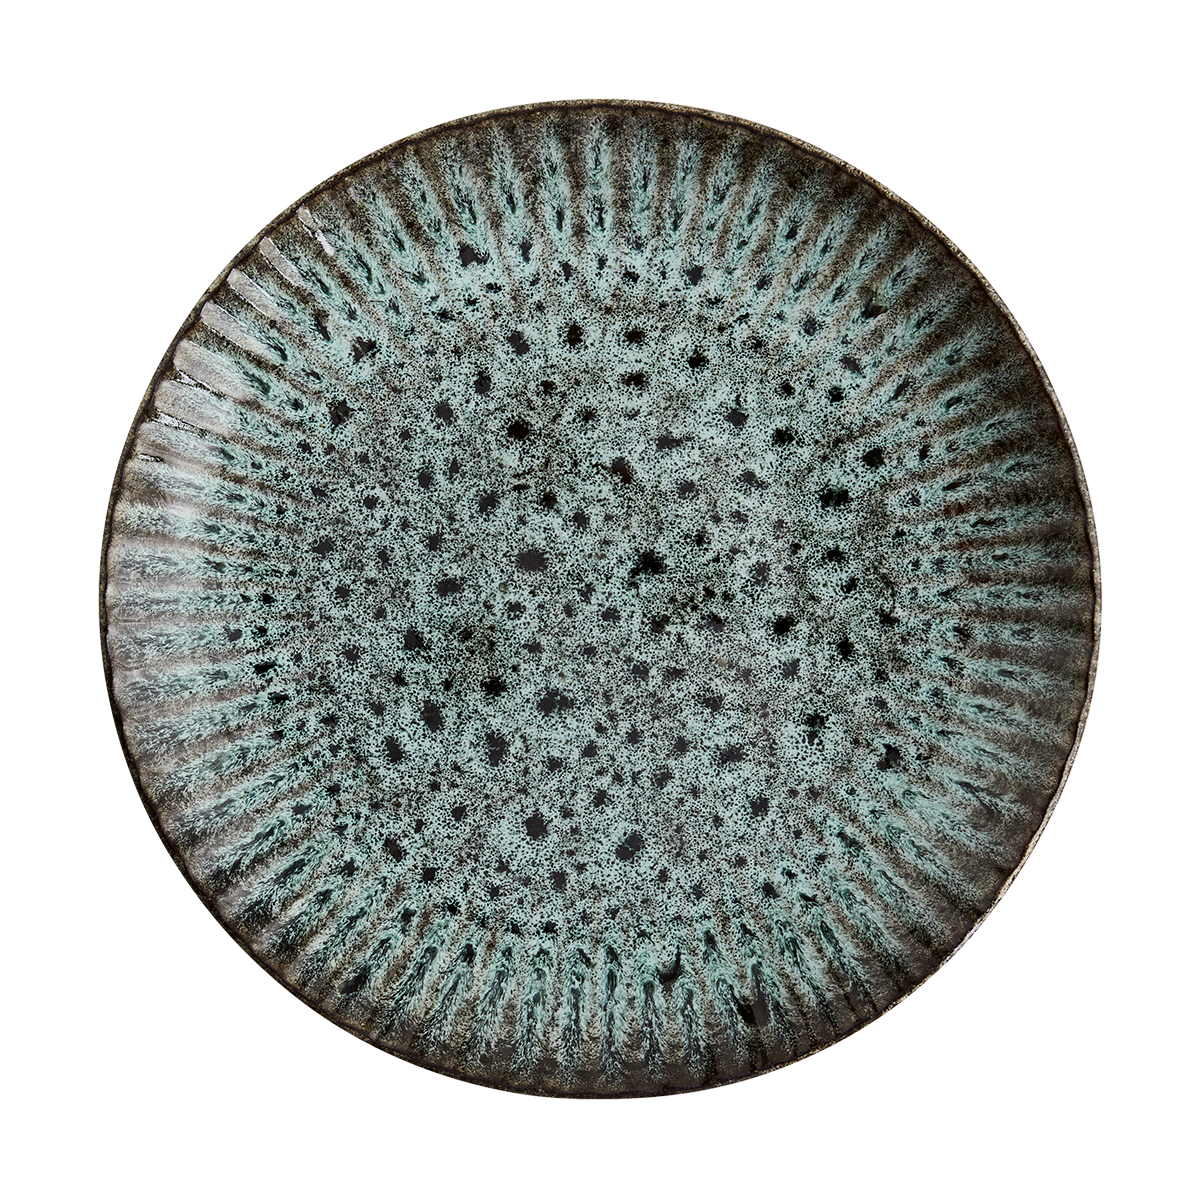 Stoneware lunch plate